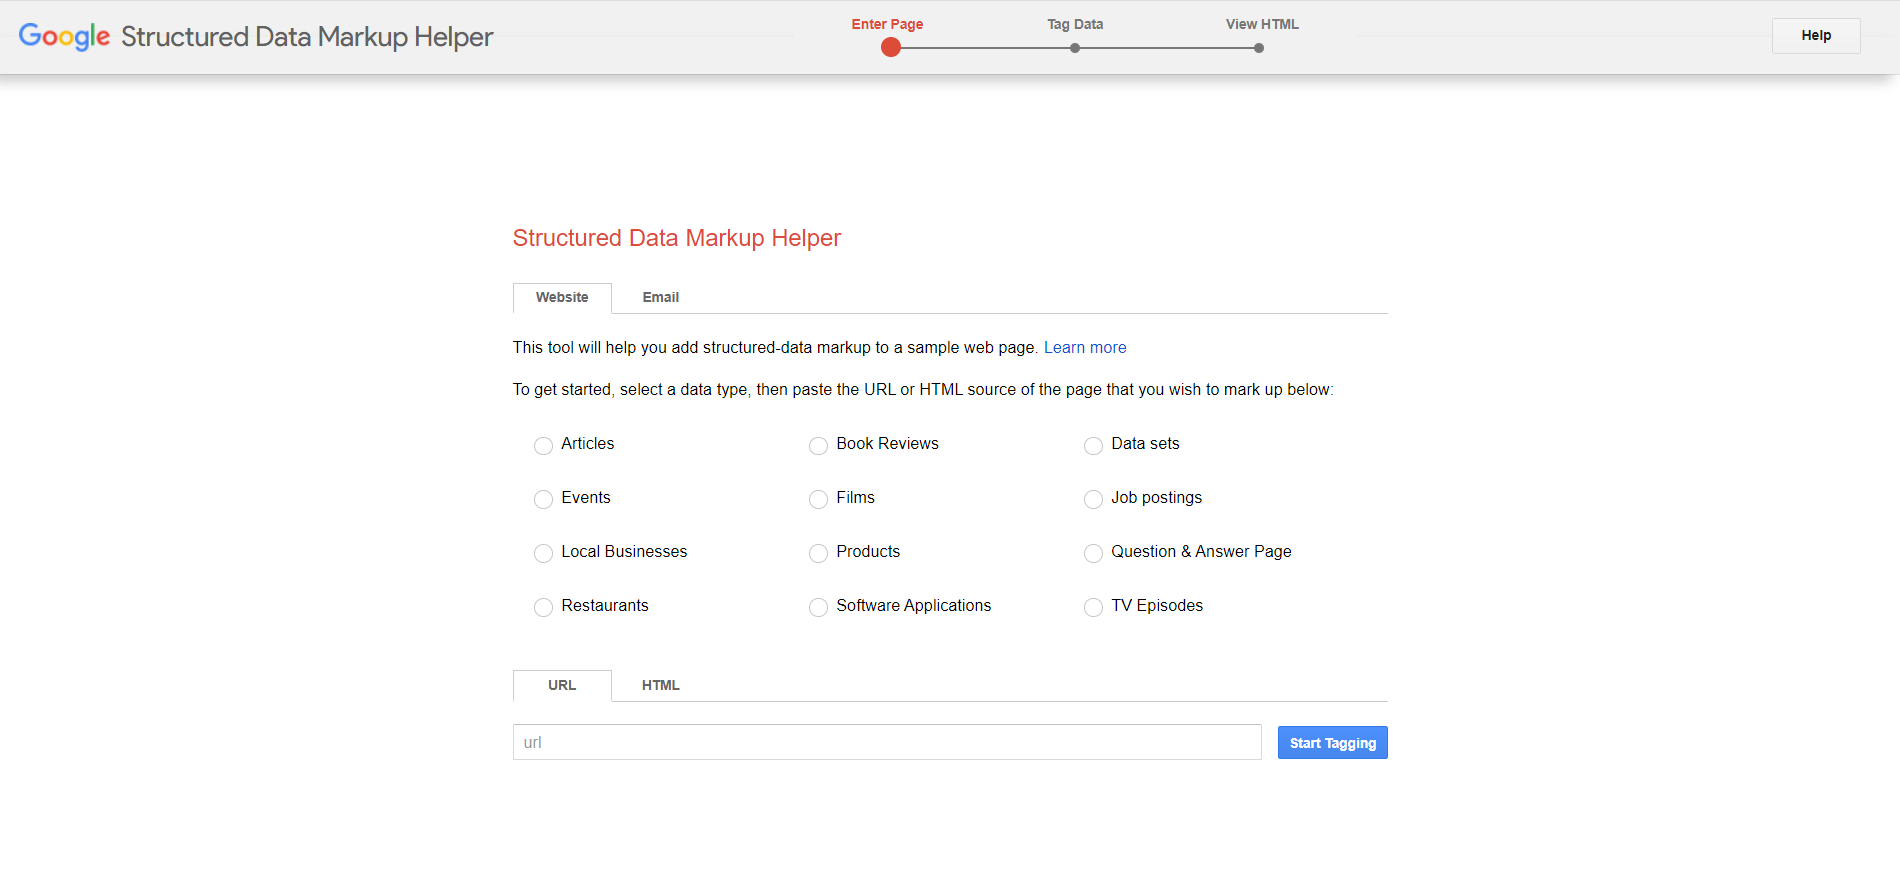 google structured data markup helper, a free seo tool to create structured data markup